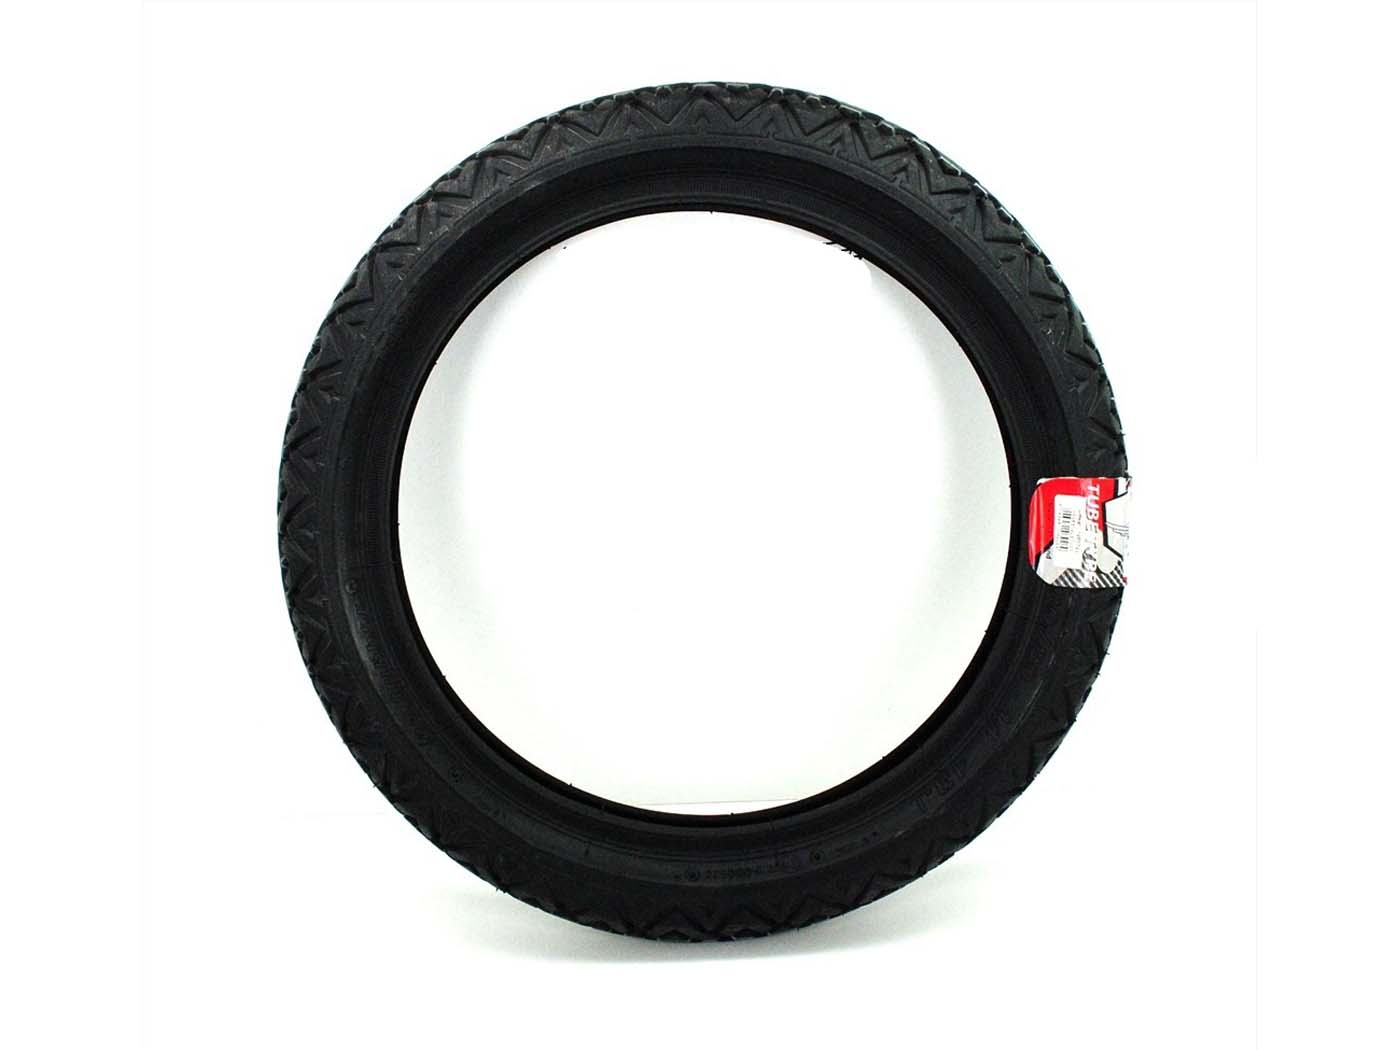 Band Vee Rubber 2 1/2 x 14 Velg voorwiel voor Puch Maxi Chopper Brommer